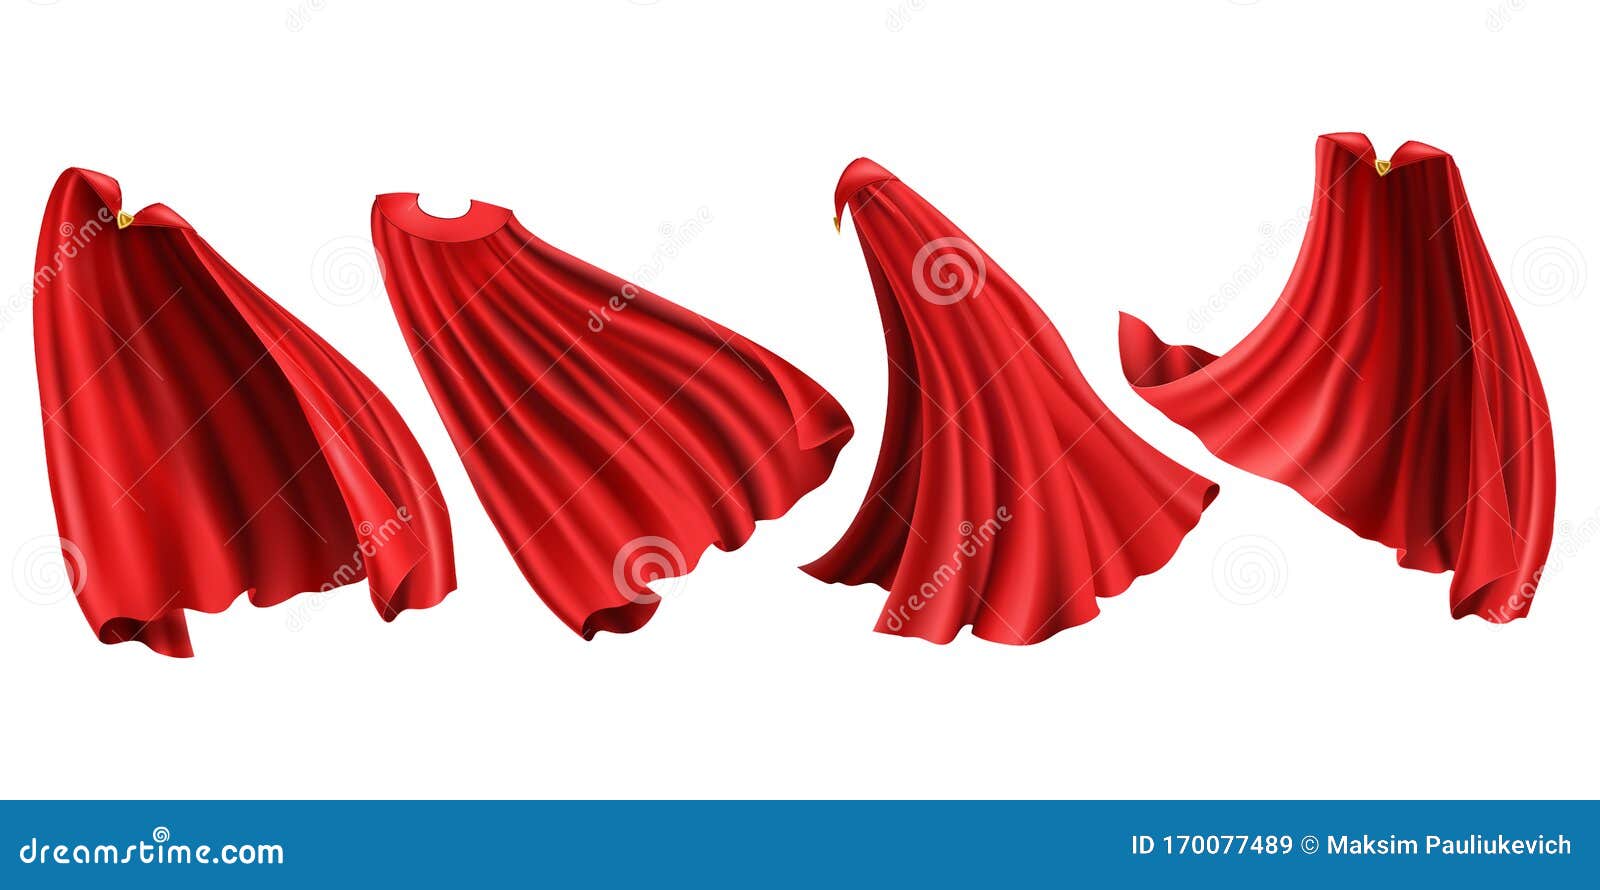 red superhero cloaks with golden clasp clipart set